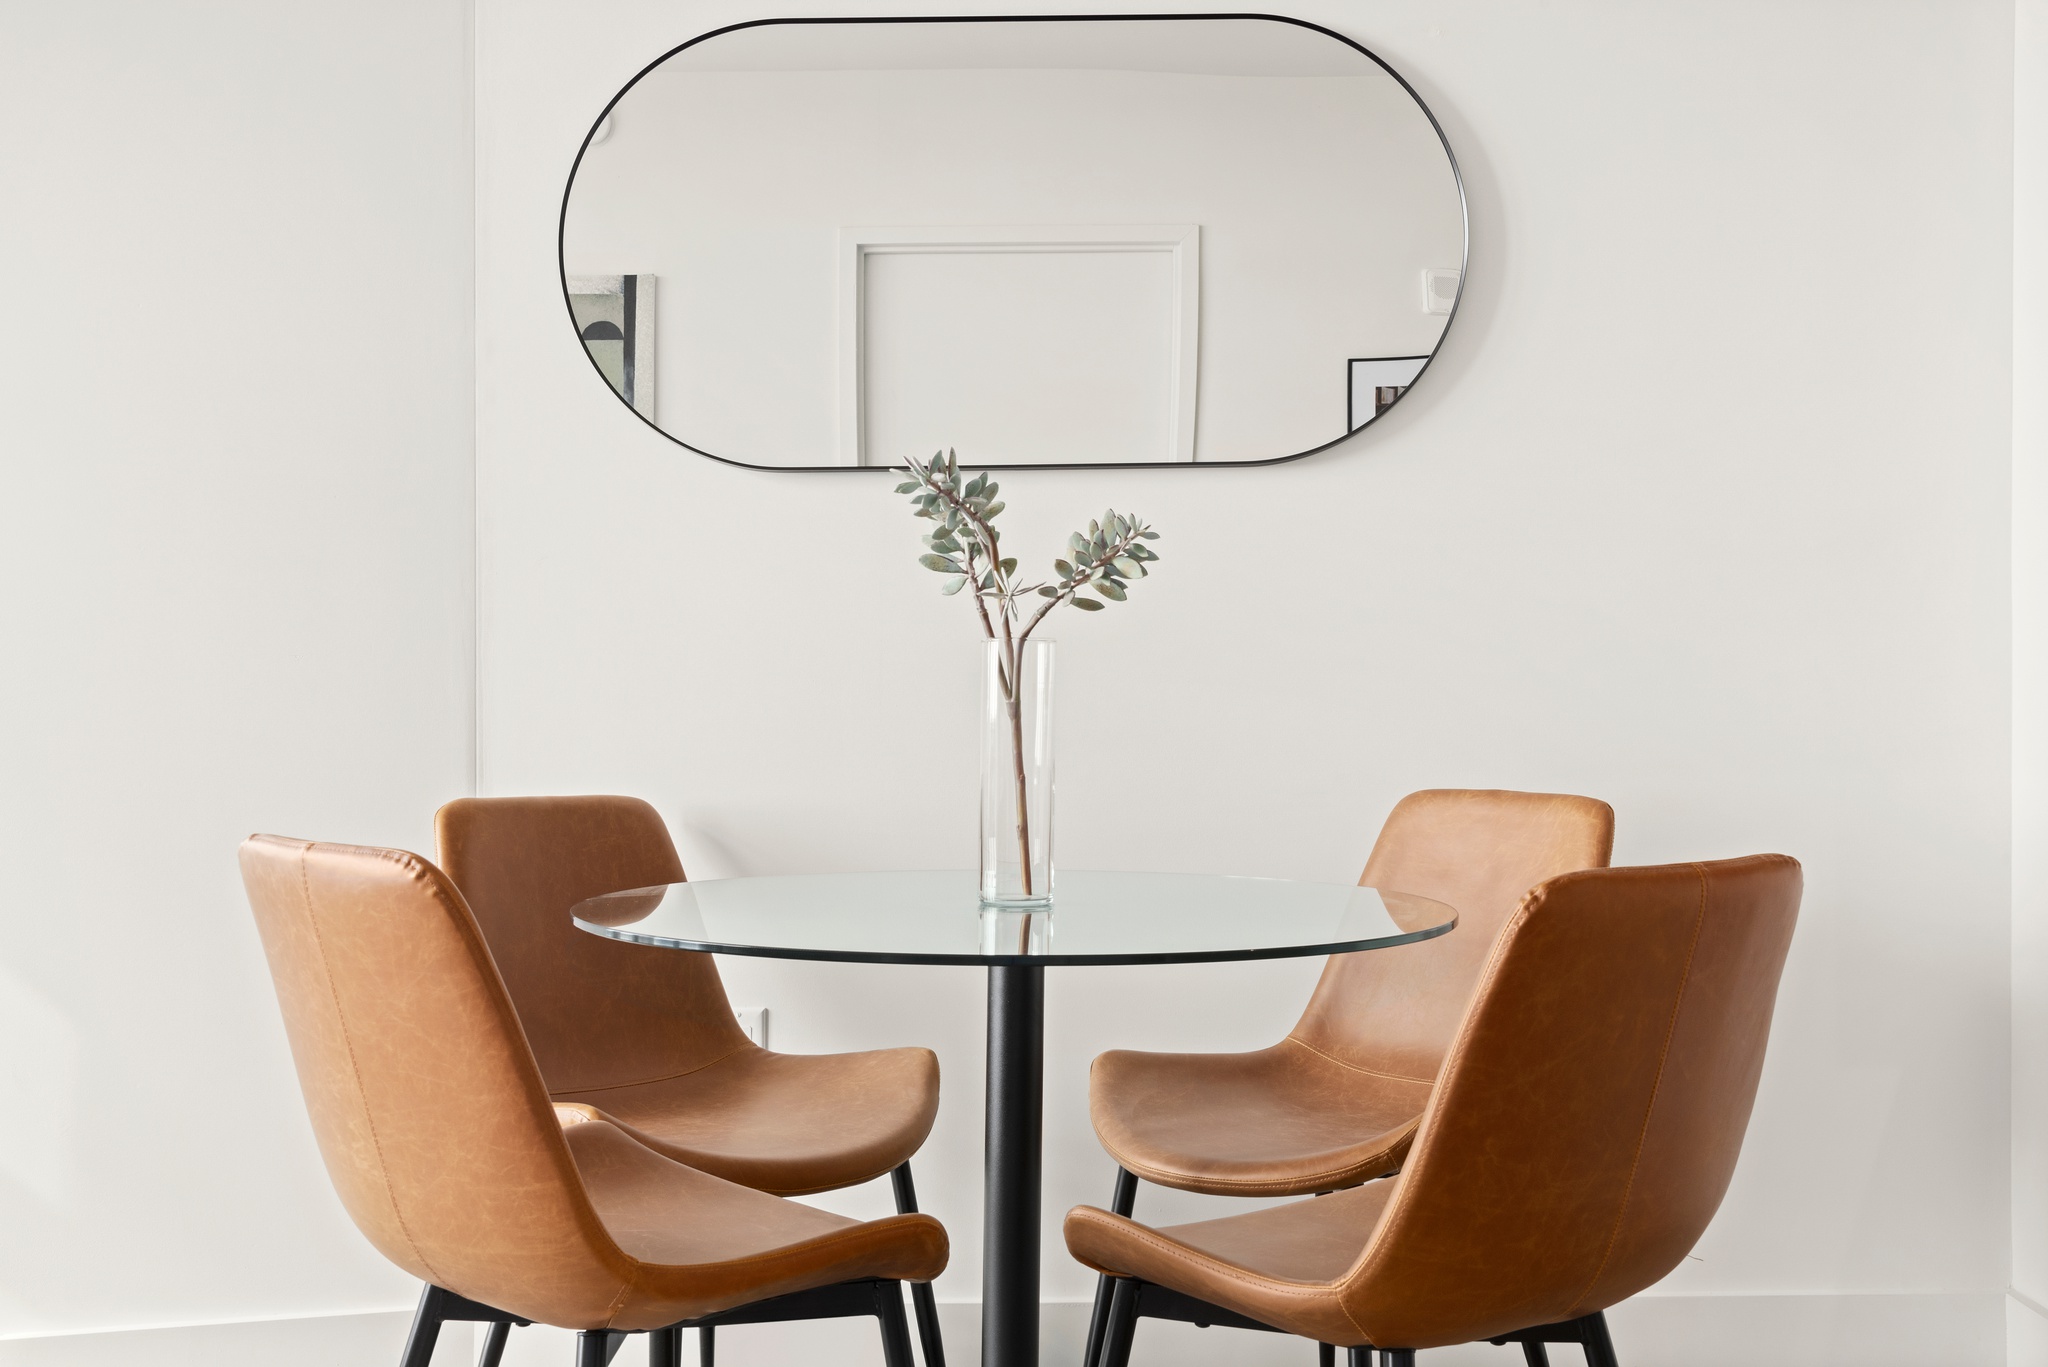 Living room detail of round glass eat in table with camel leather chairs and oval mirror above on white wall